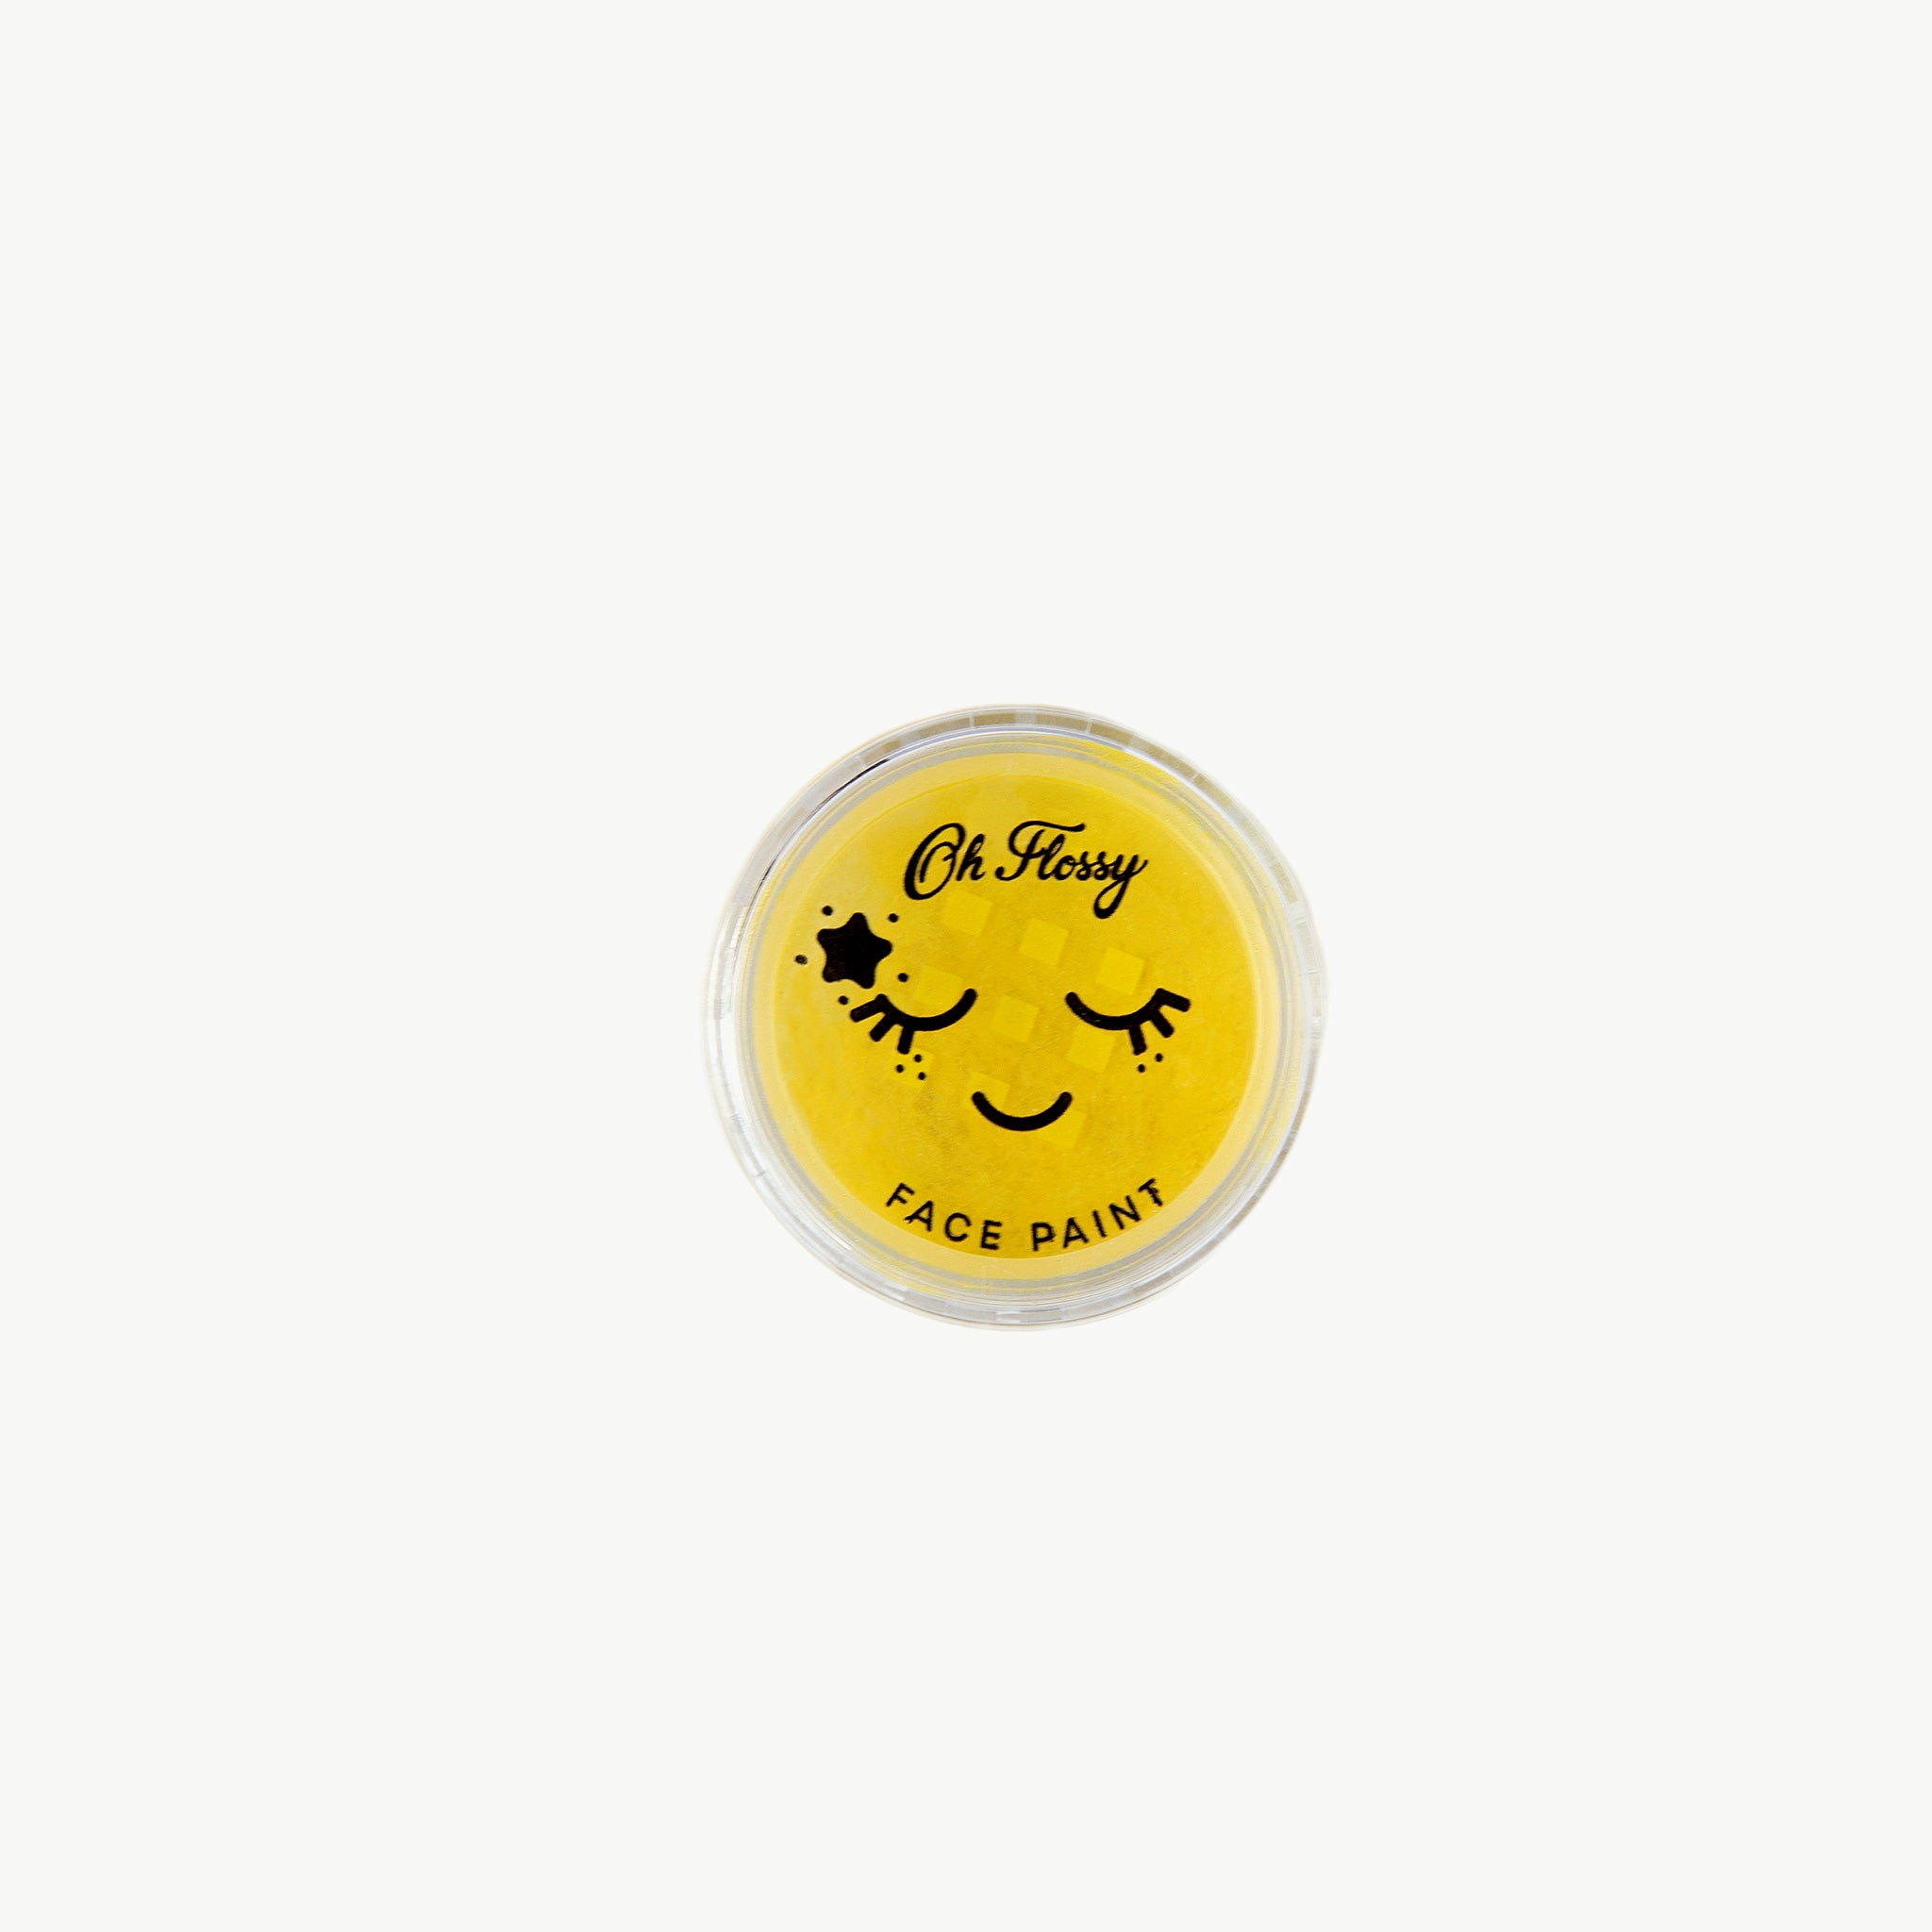 Oh-Flossy-Kids-Natural-Makeup-Face-Paint-Yellow